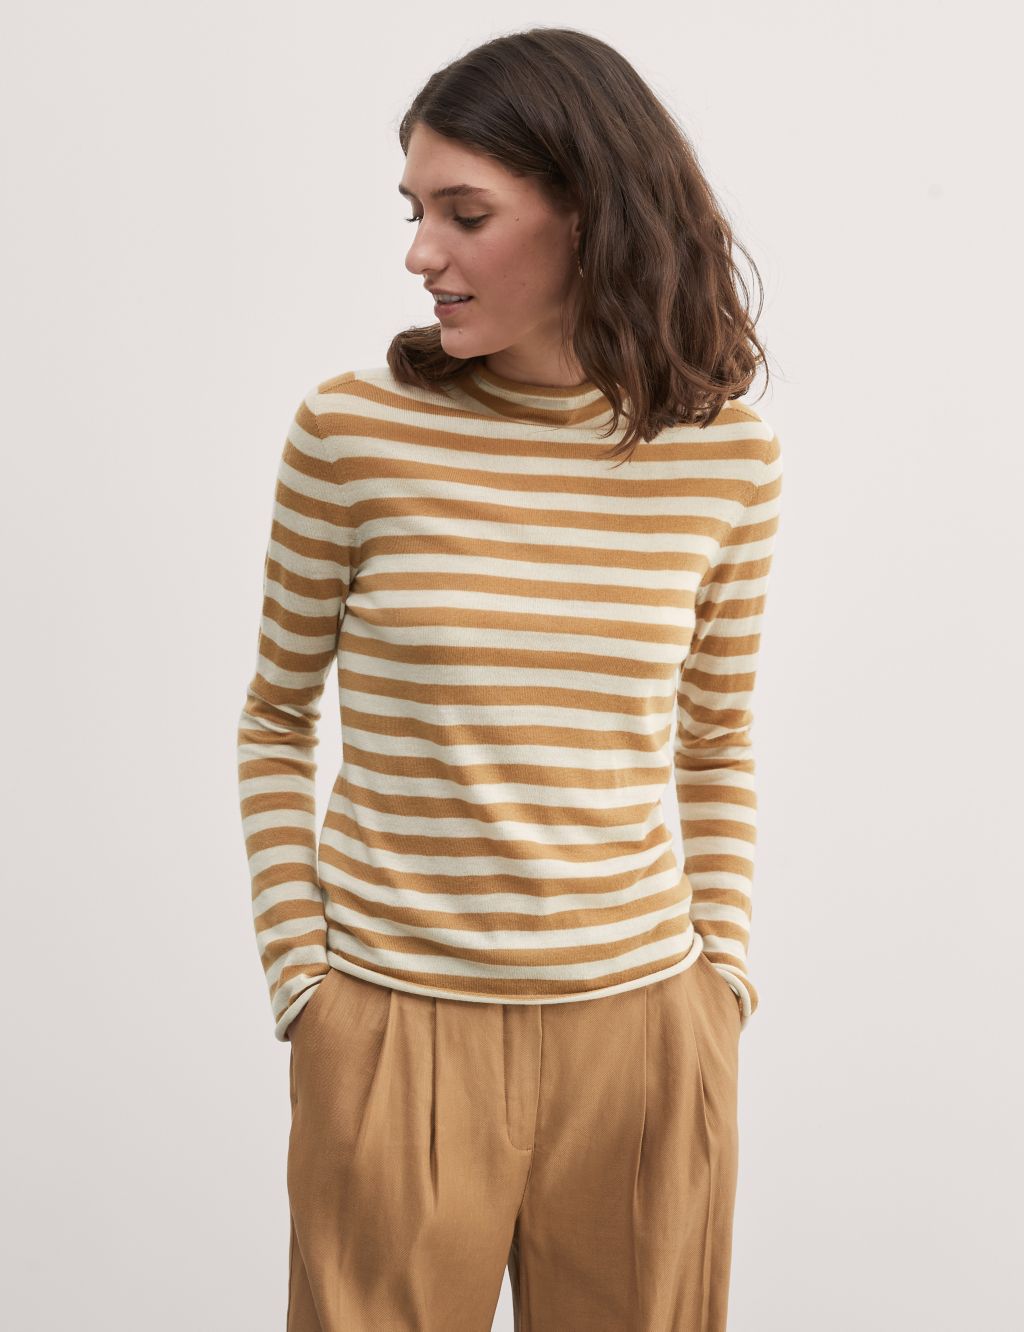 Wool Rich Striped Jumper with Cashmere image 4